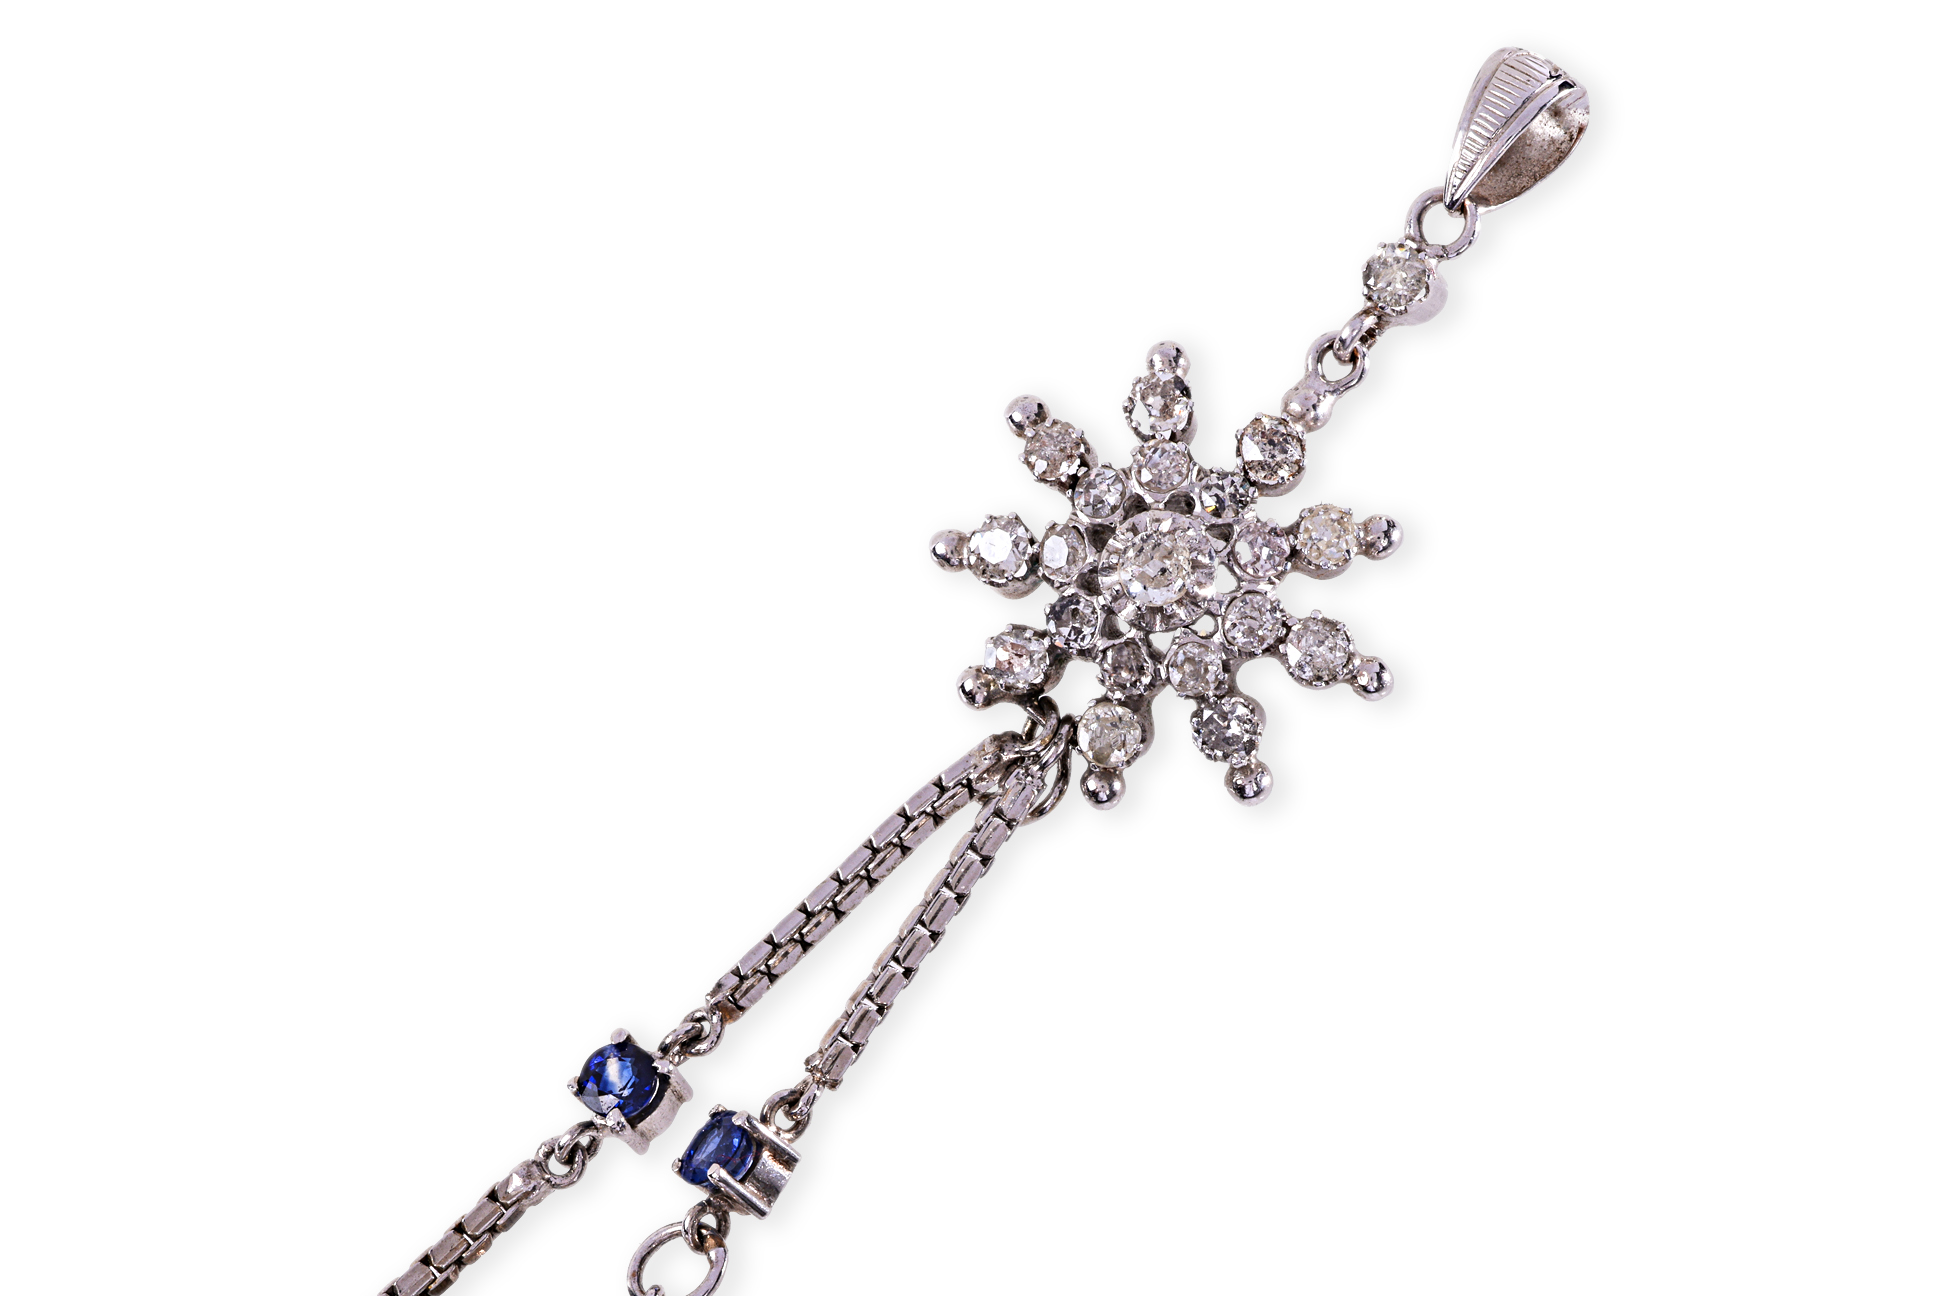 A CULTURED BAROQUE PEARL, SAPPHIRE AND DIAMOND PENDANT - Image 2 of 3